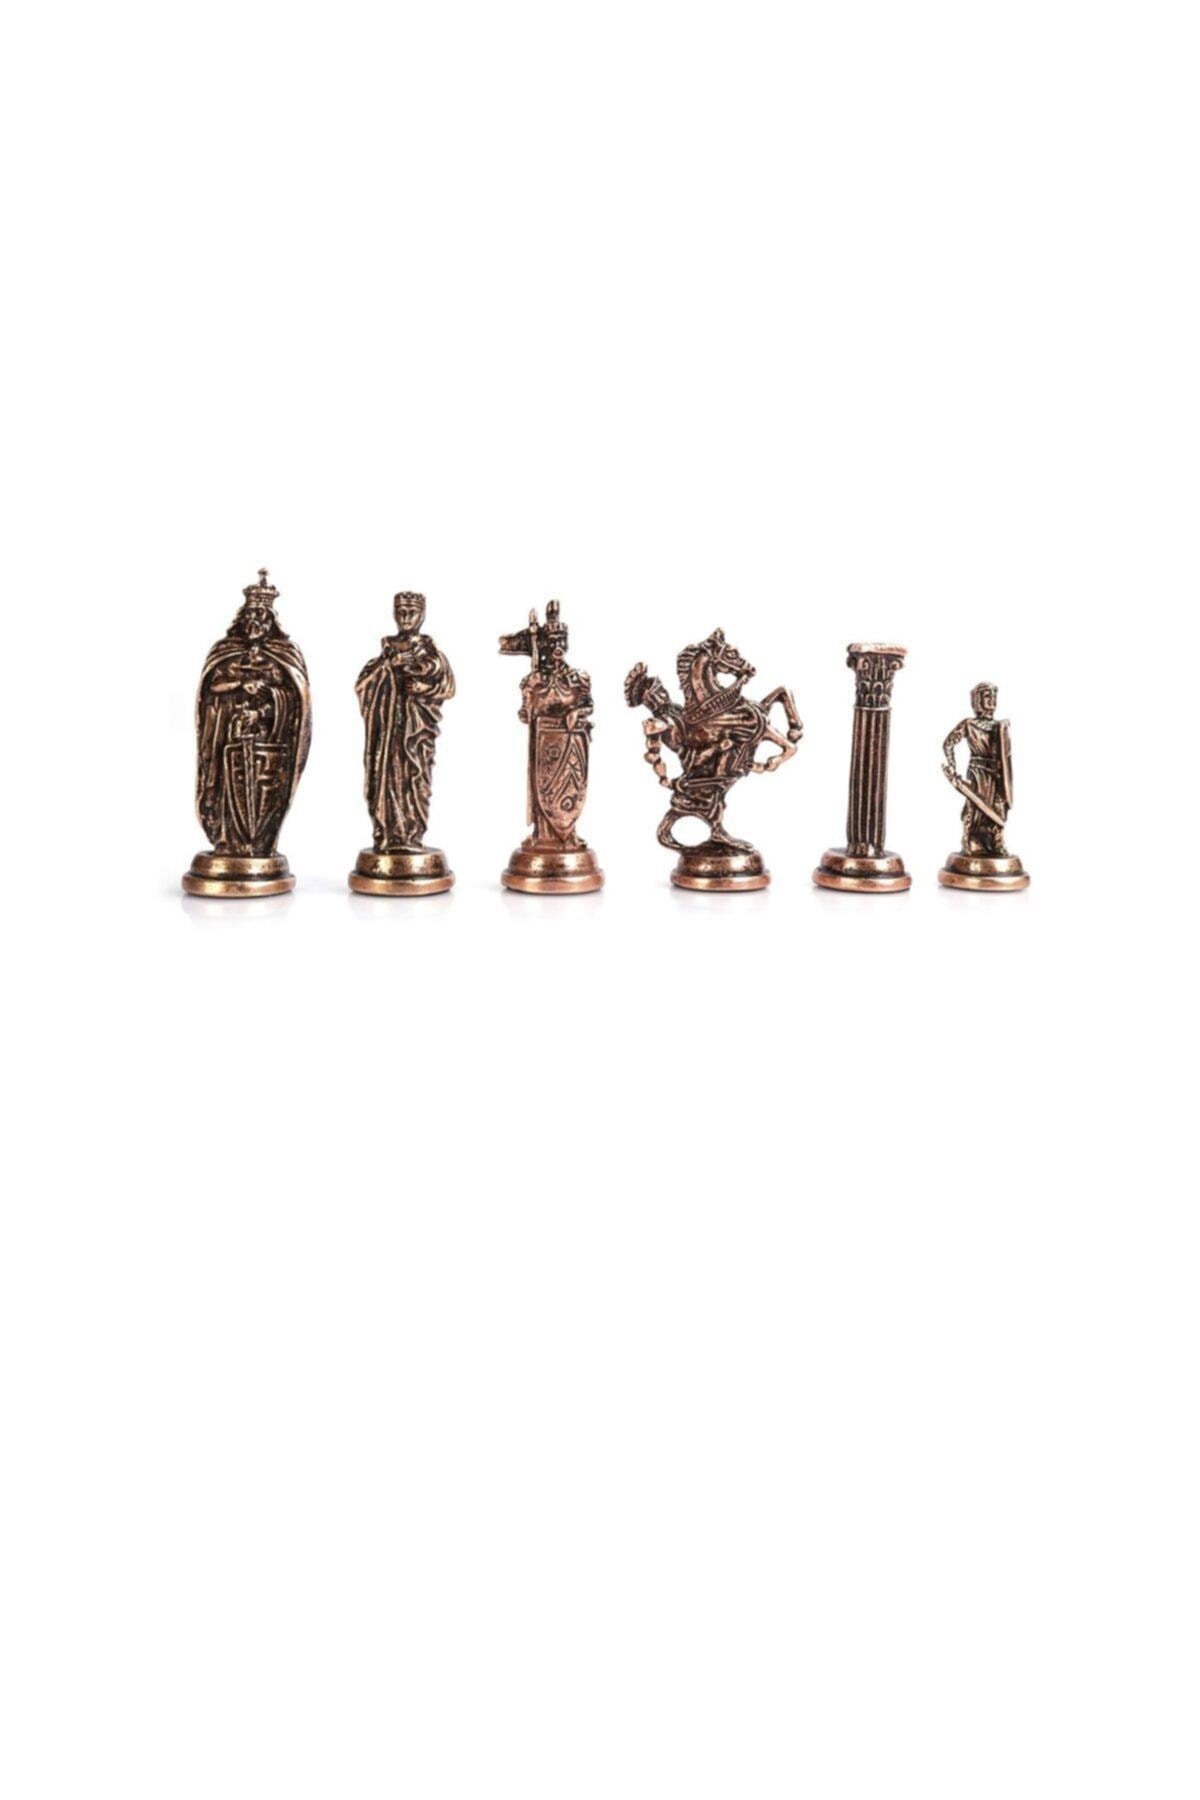 5 No. Antique Copper Chess pieces And Luxury Folding Marble Patterned Chess Board Chess Game Set